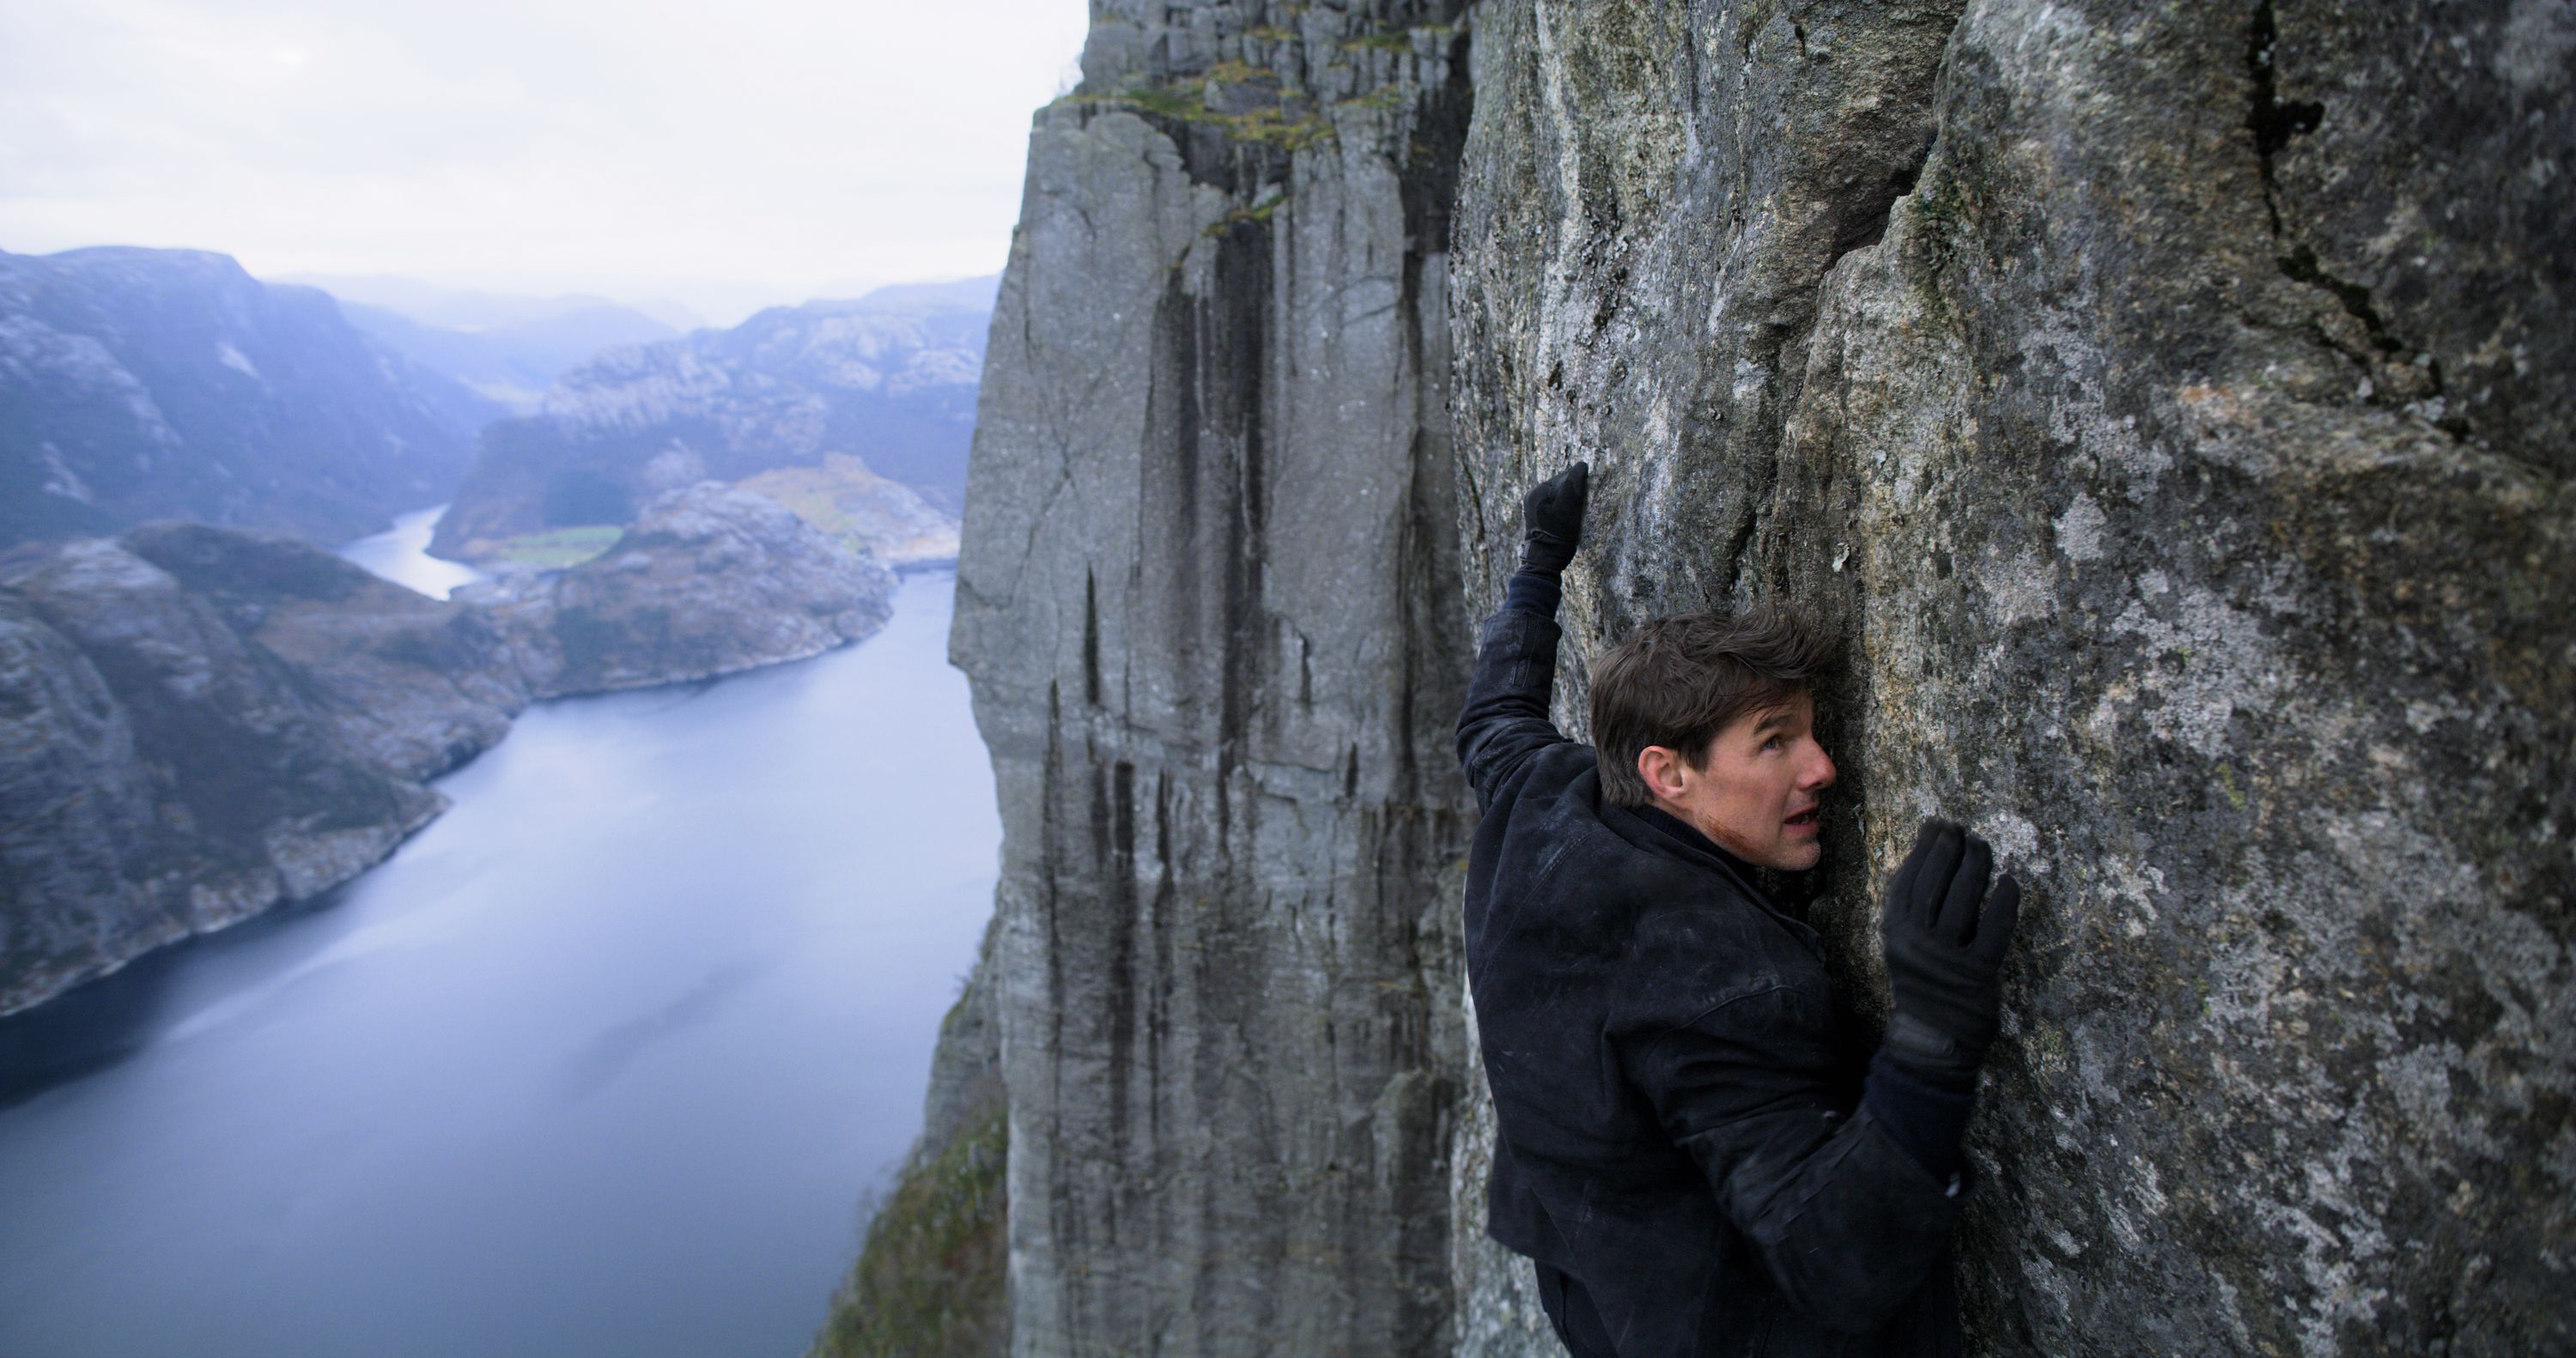 Mission Impossible 6 Fallout Poster Wallpapers